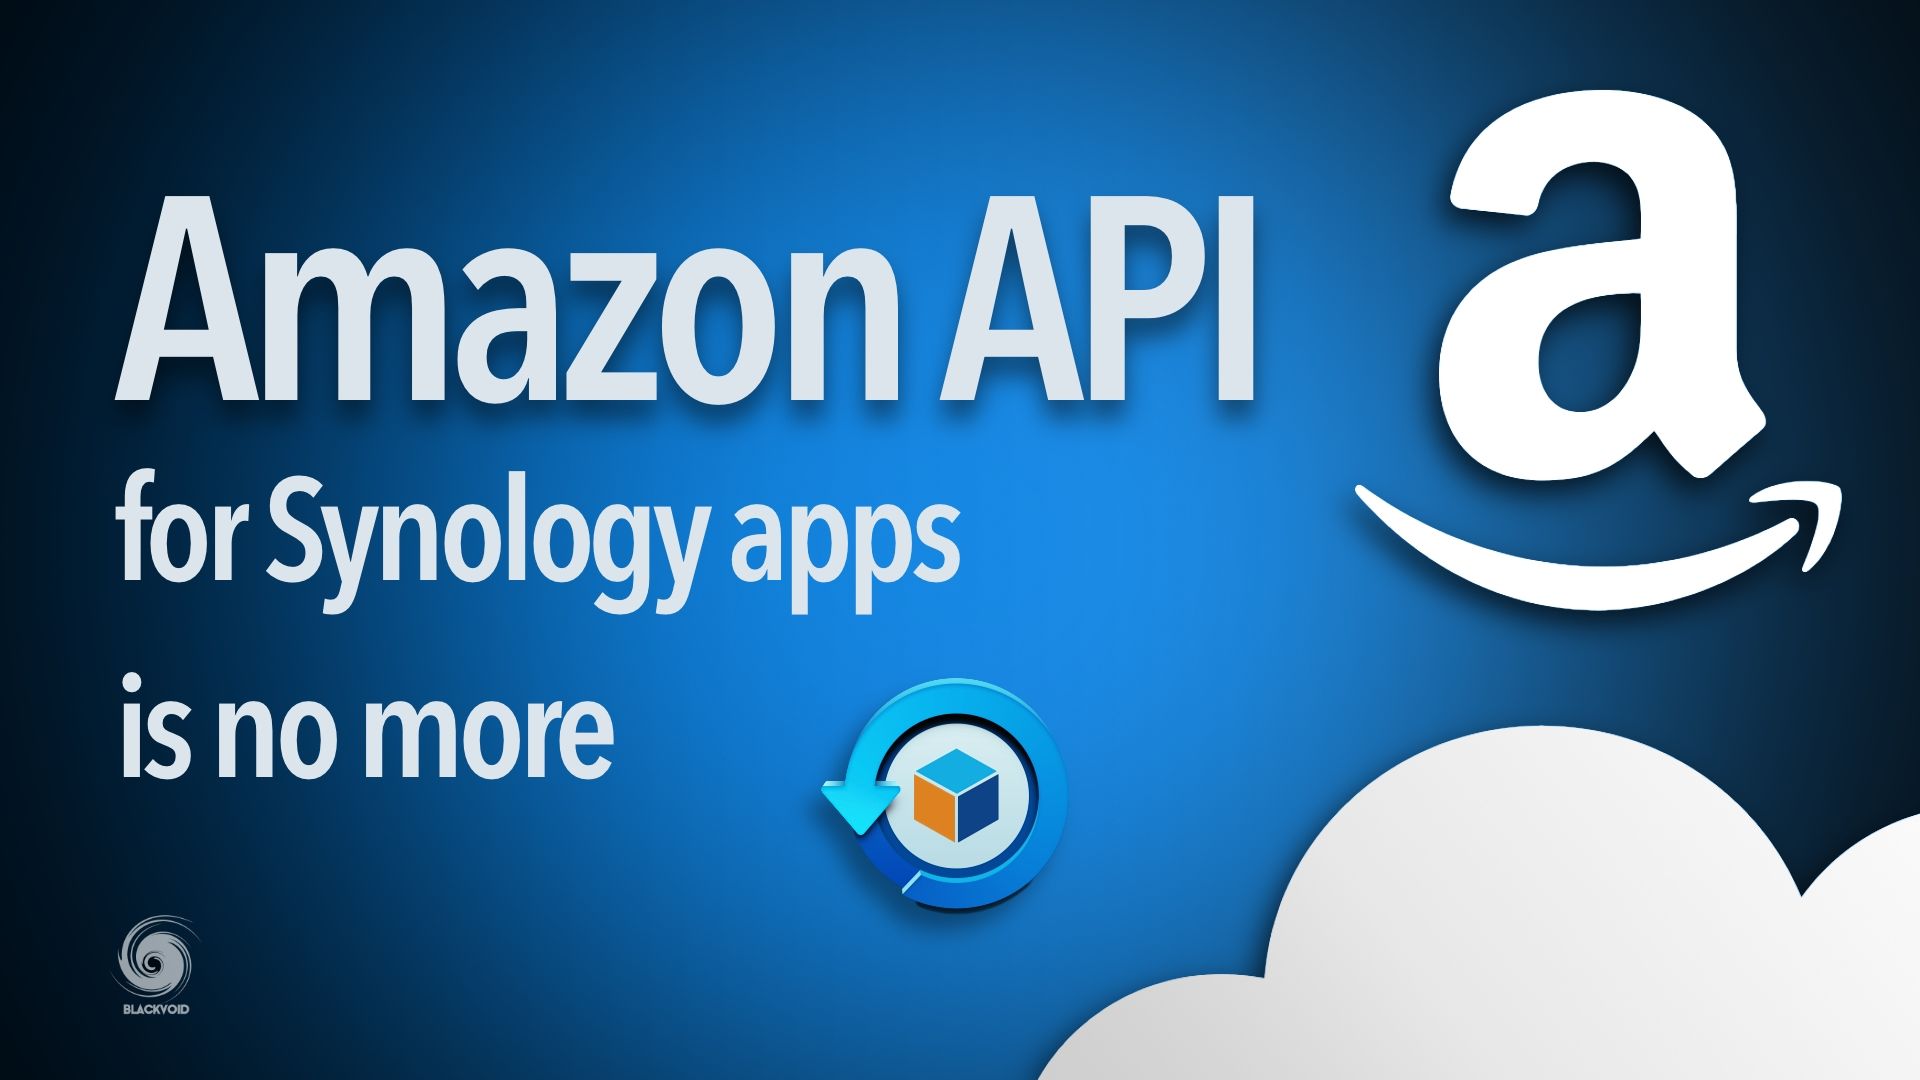 Amazon to terminate API support for Synology apps